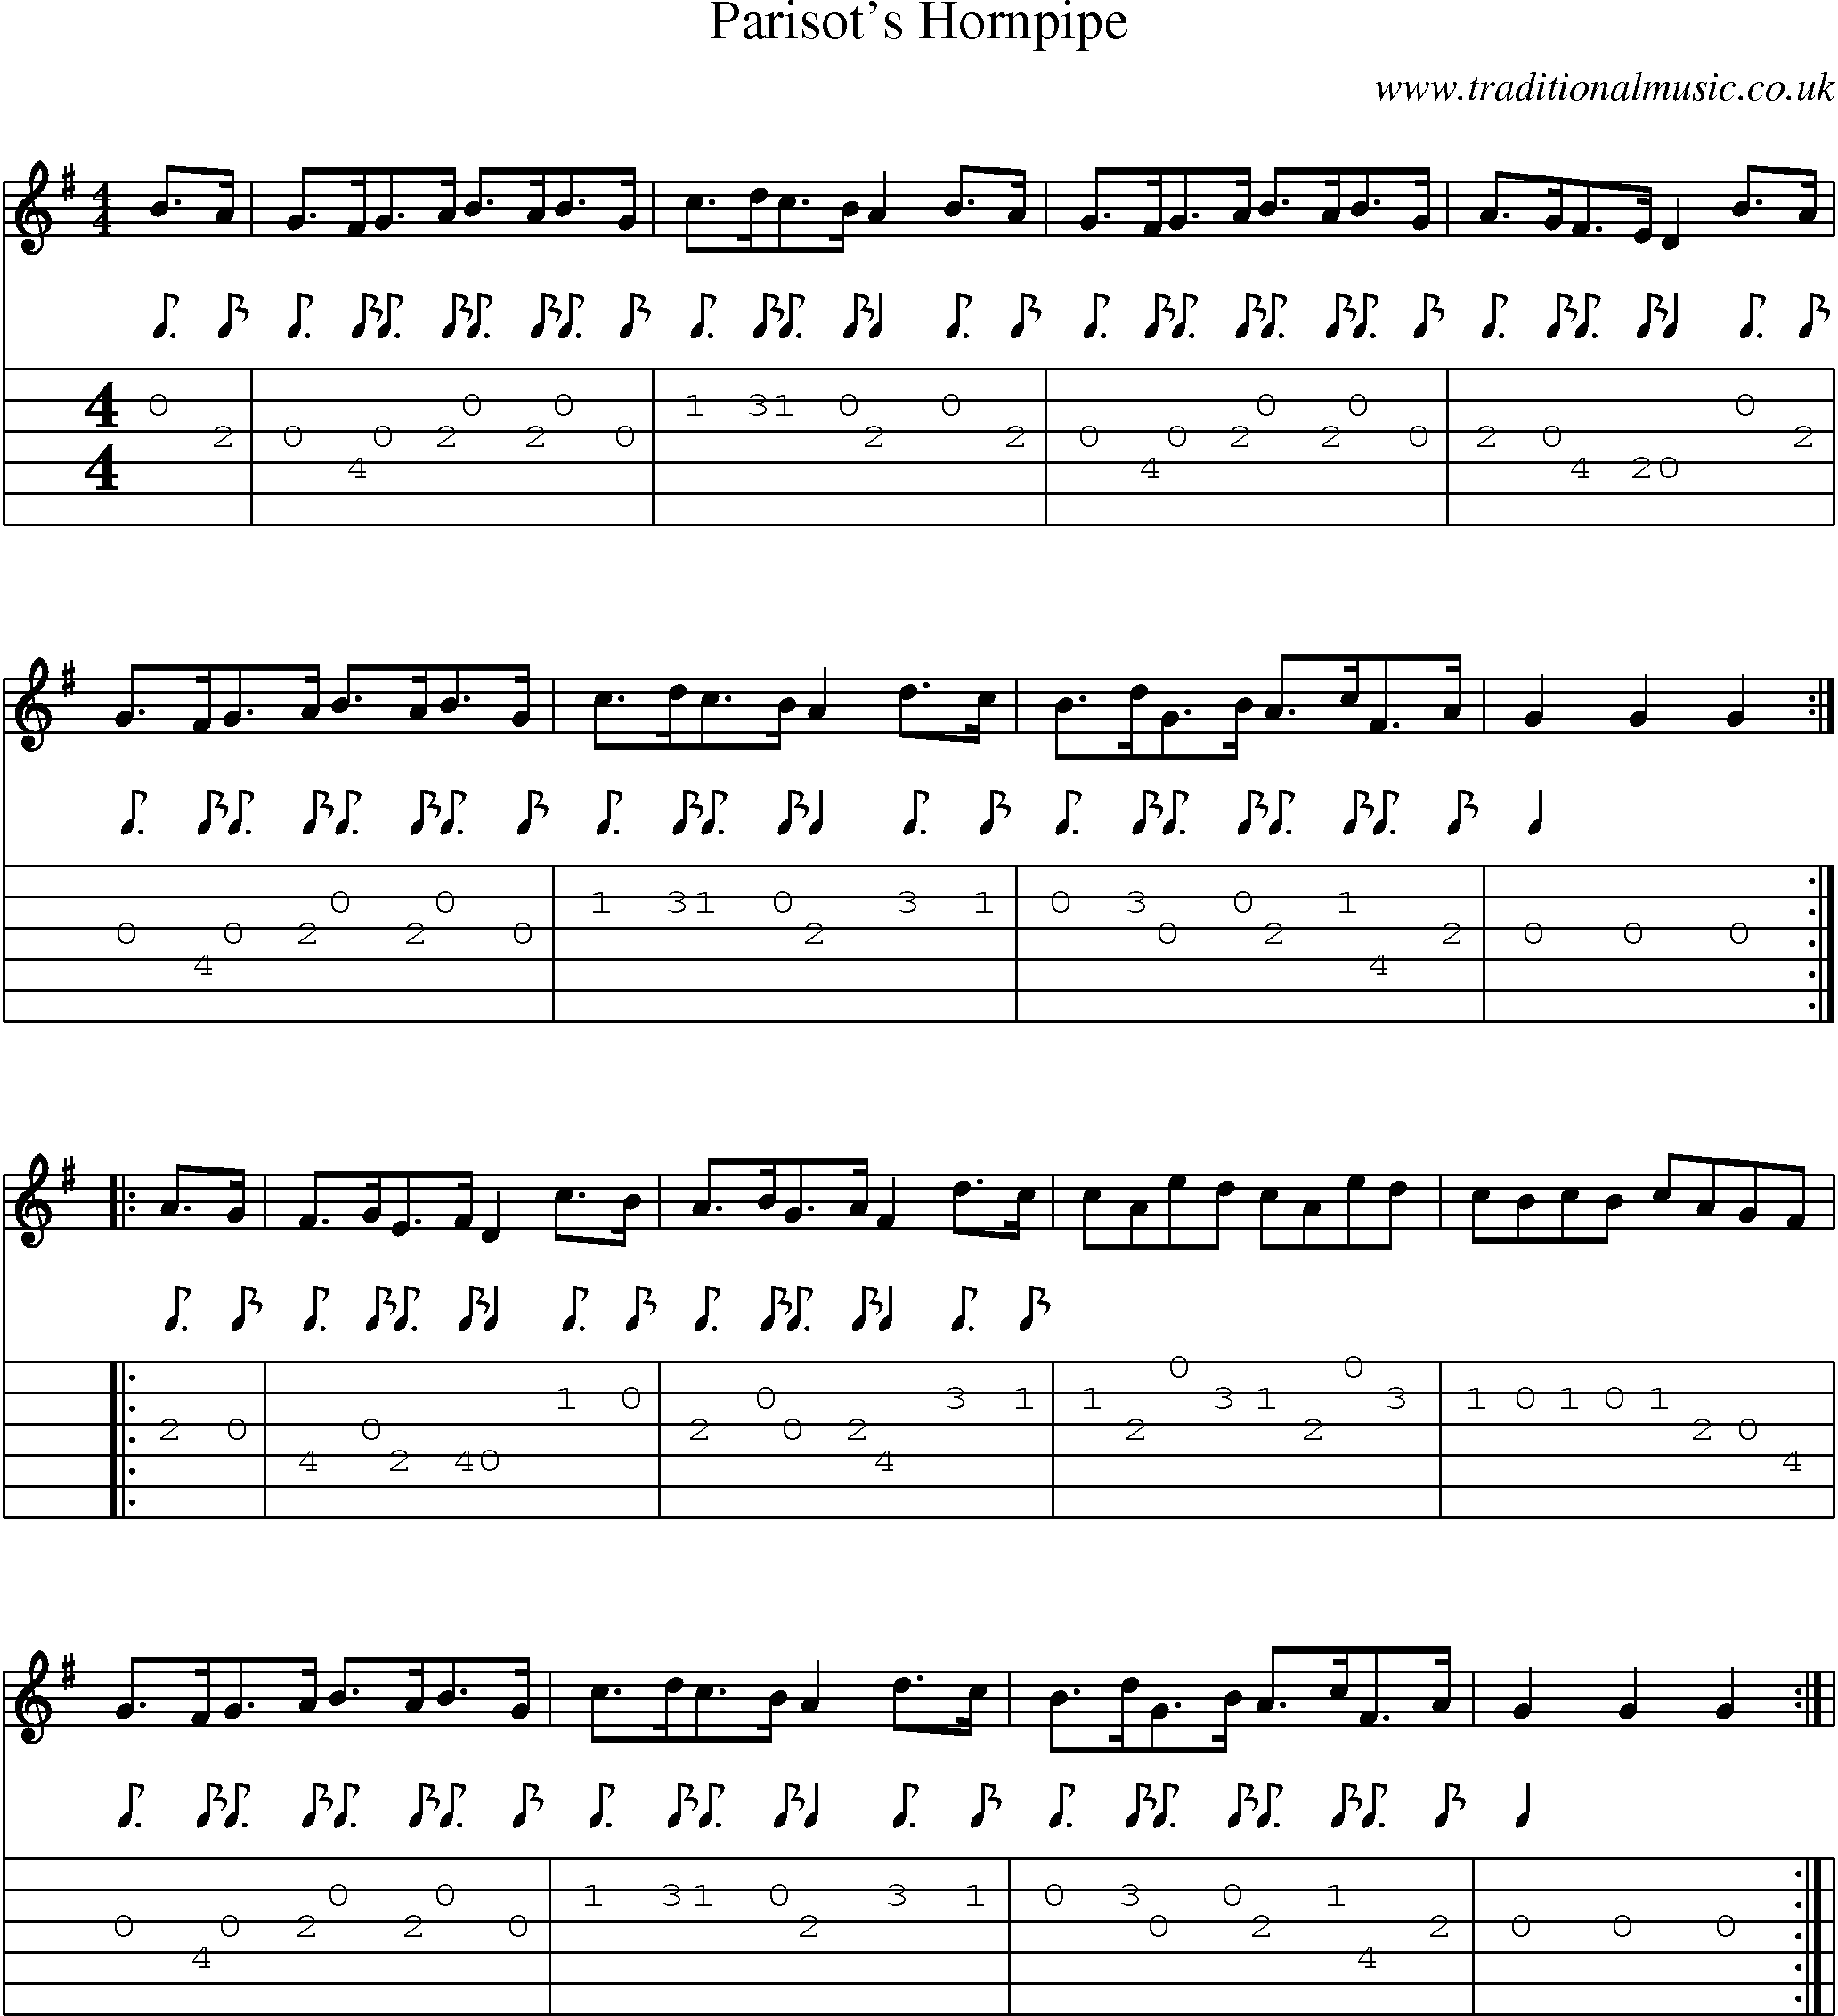 Music Score and Guitar Tabs for Parisots Hornpipe